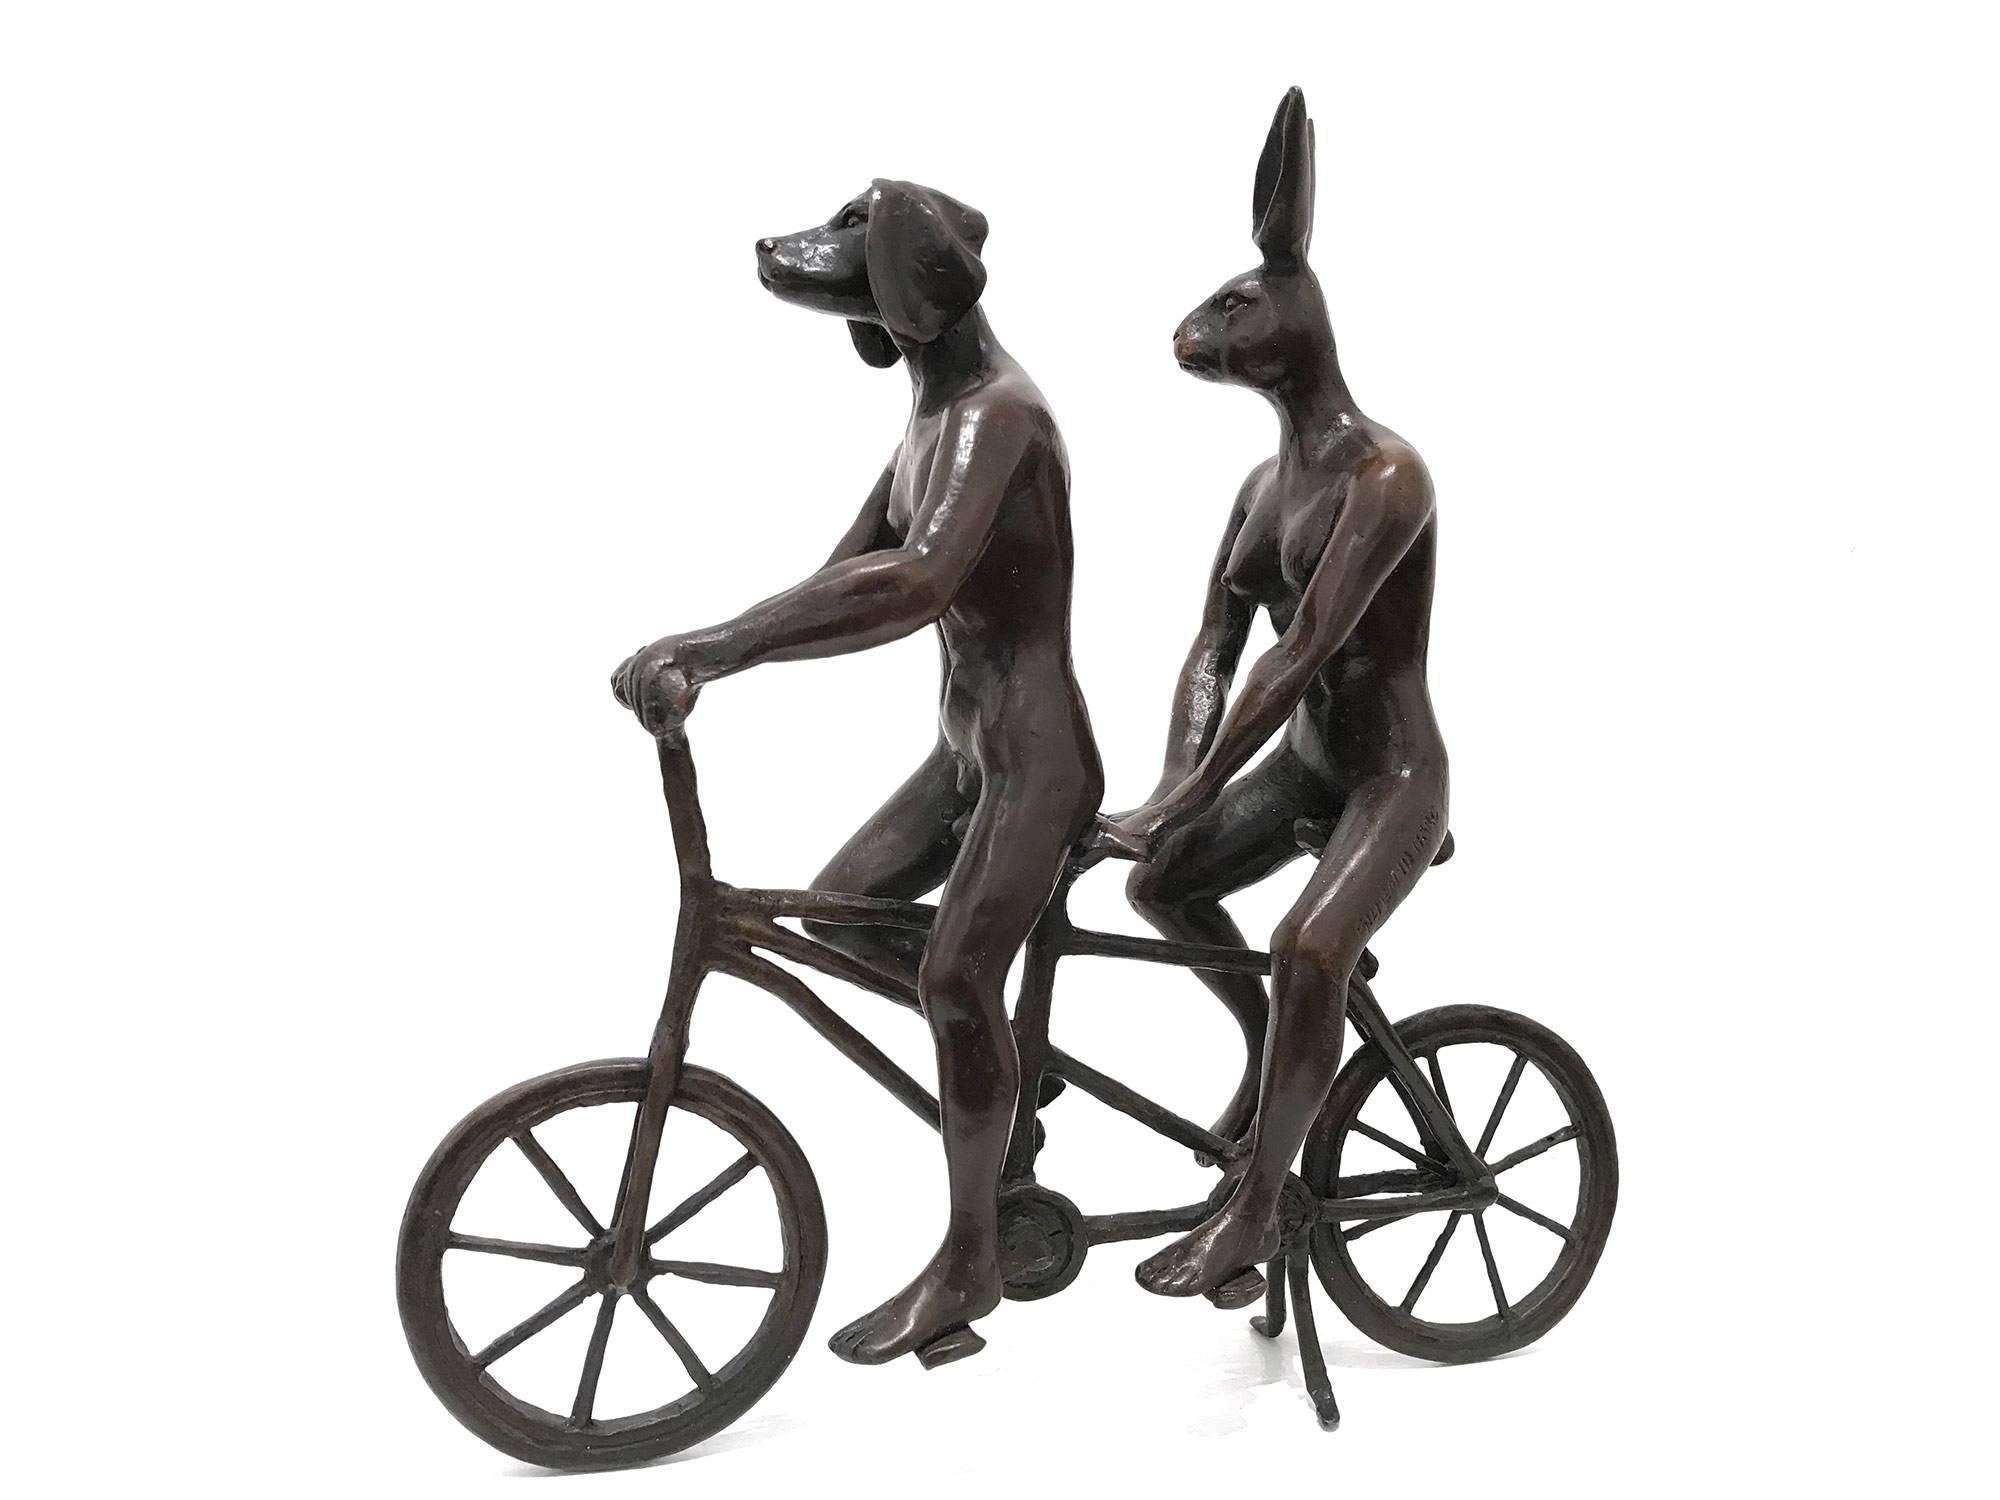 "They Loved Riding Together in Paris" Bicycle Sculpture with Deep Bronze Patina